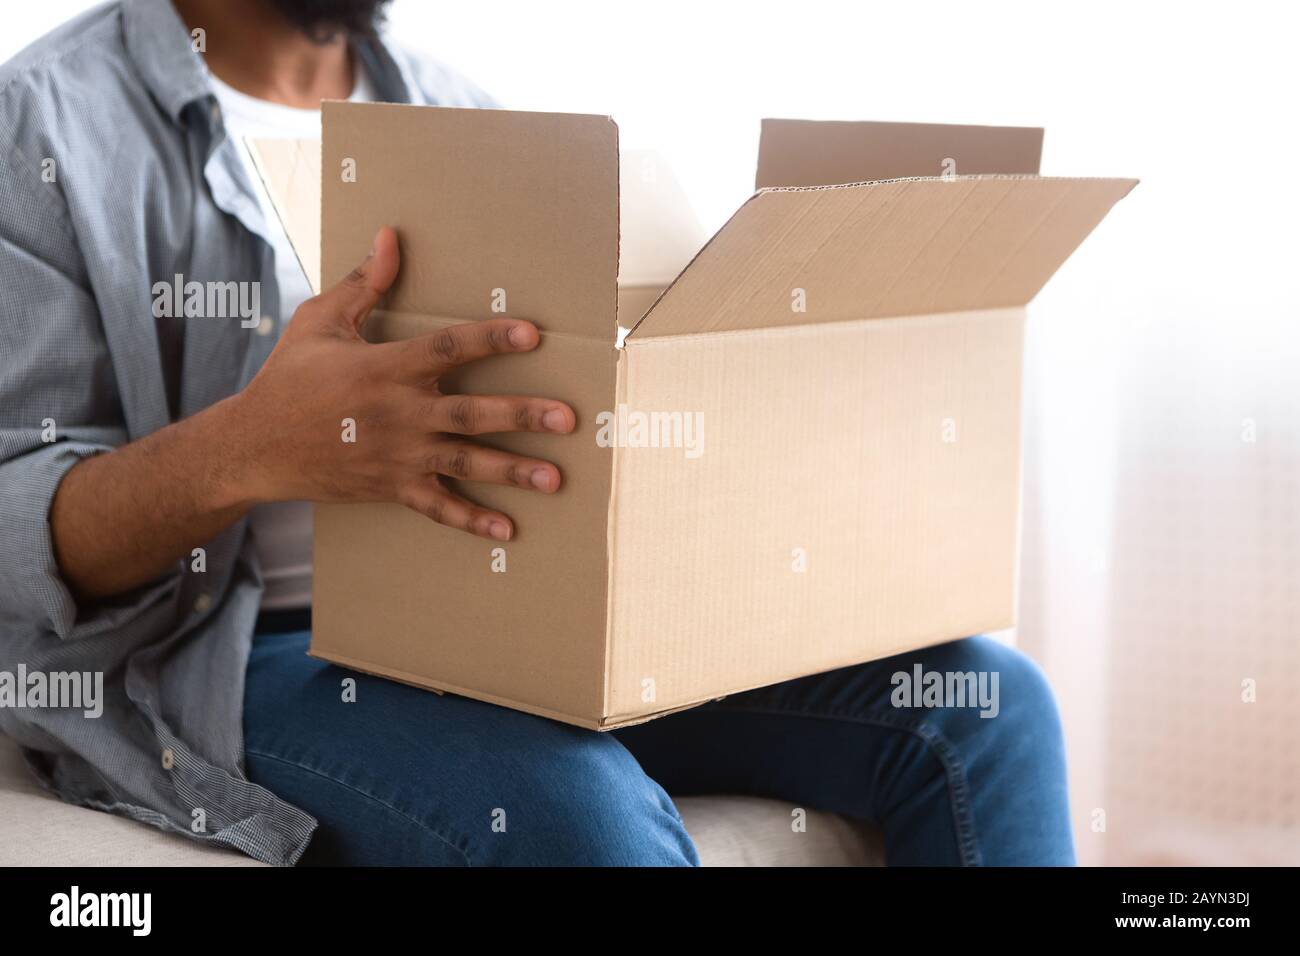 Afro american man holding big box with online purchases Stock Photo